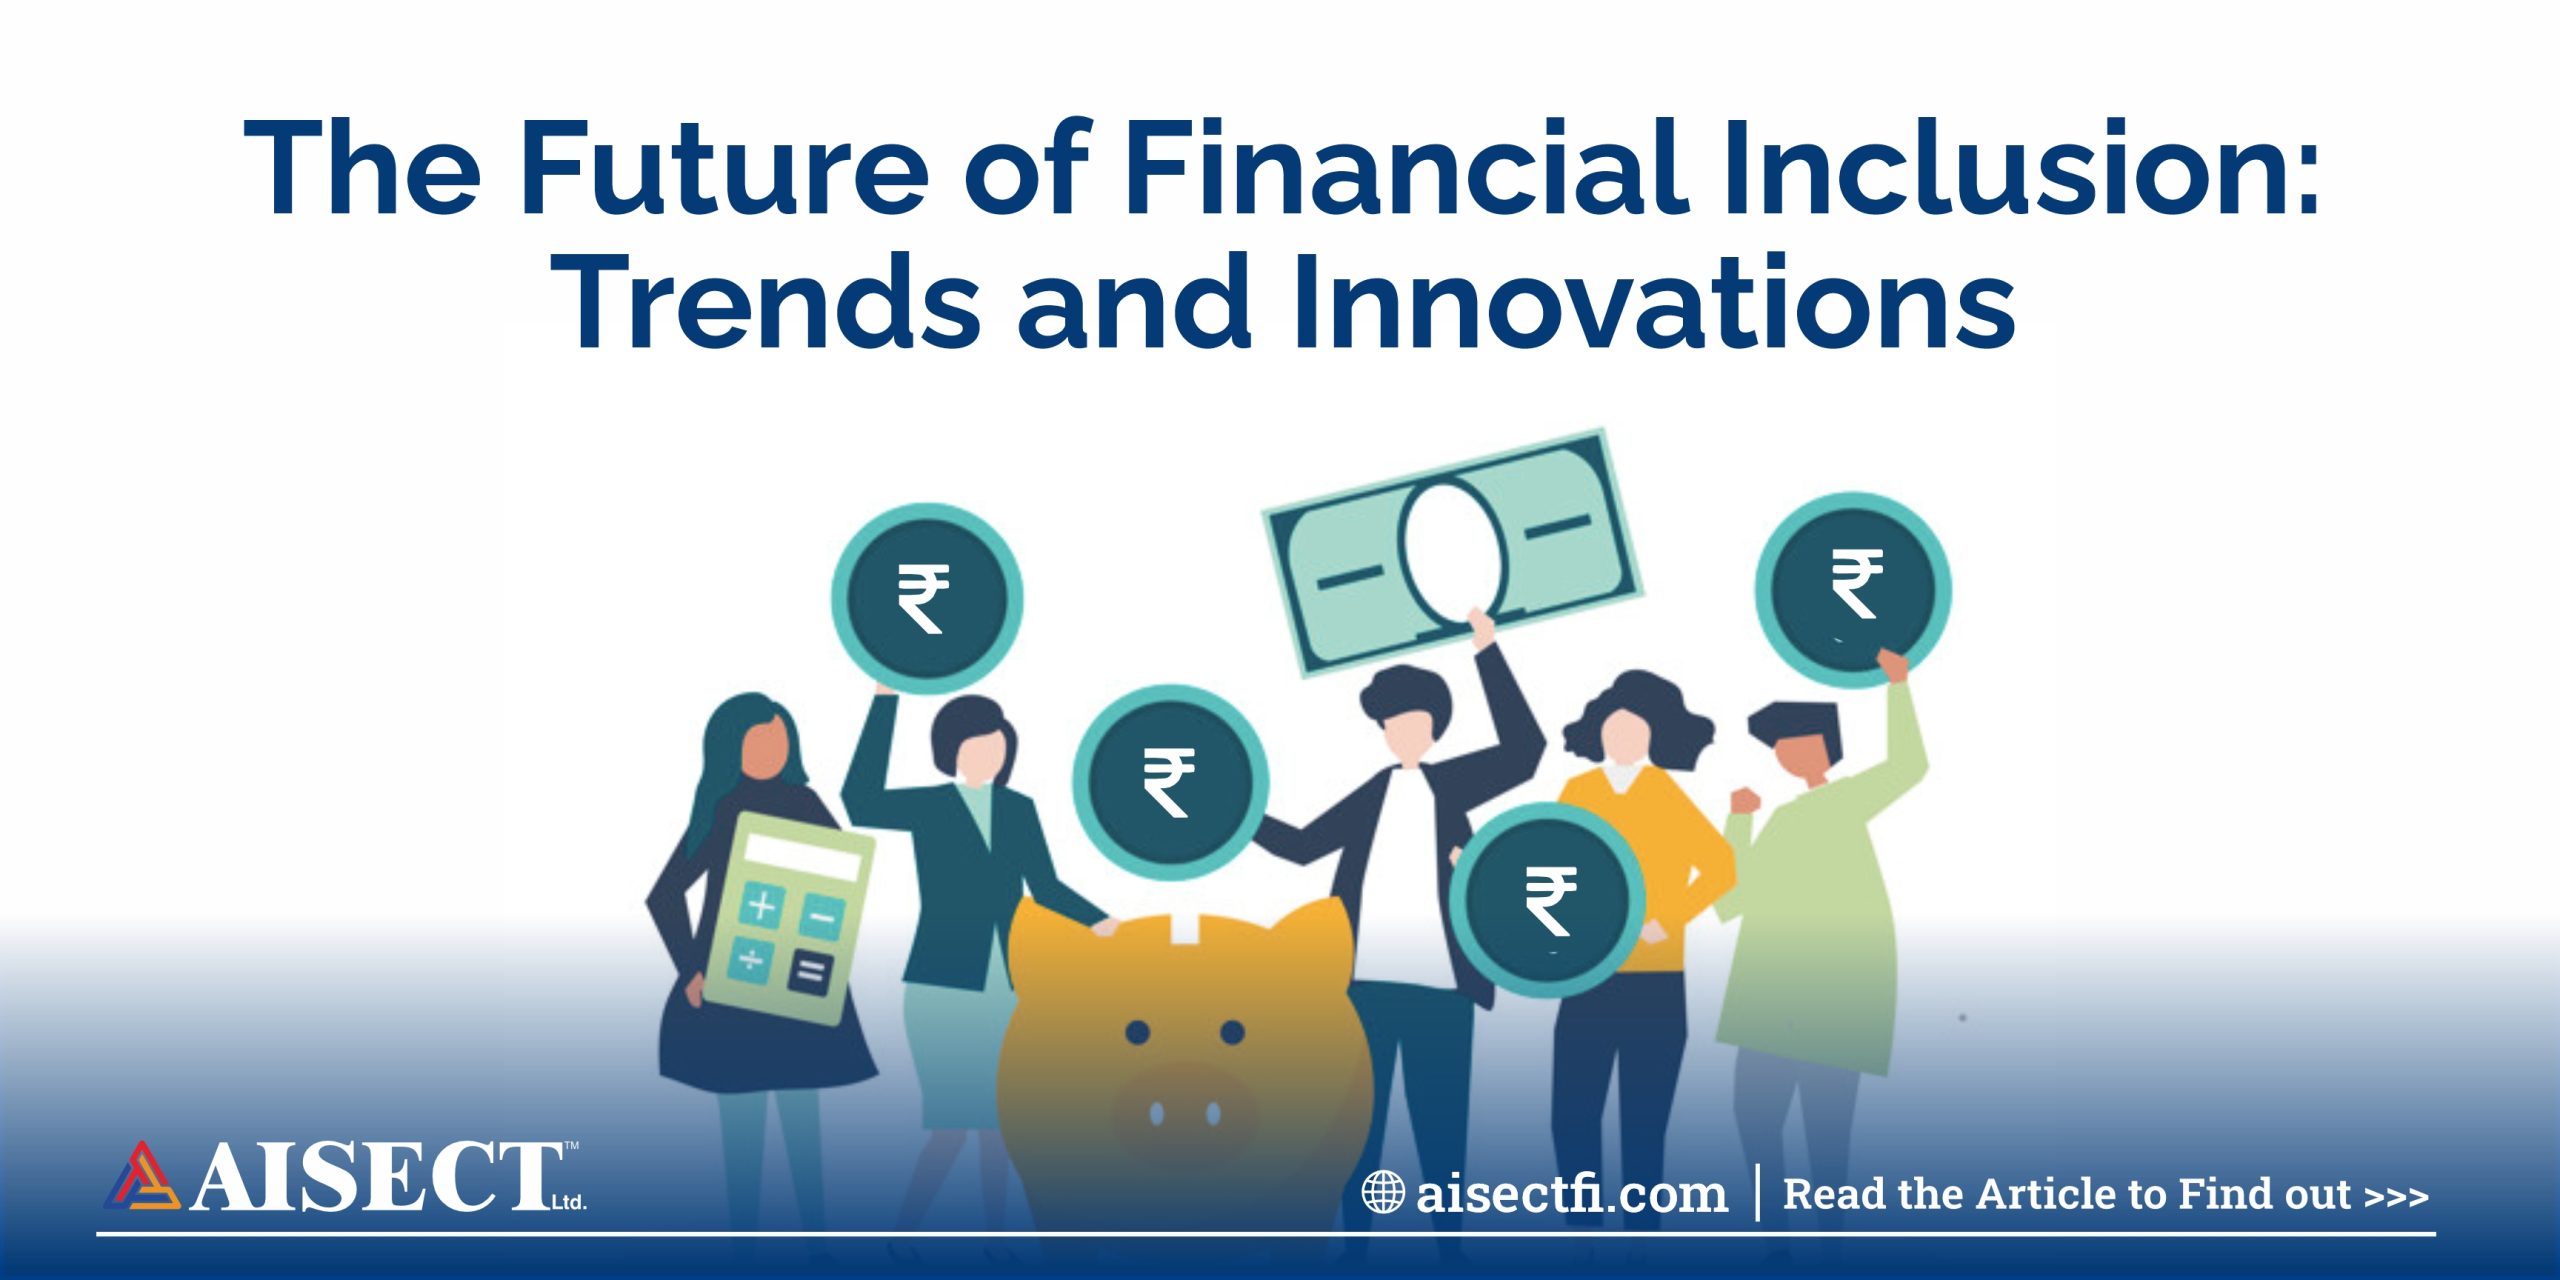 The Future of Financial Inclusion